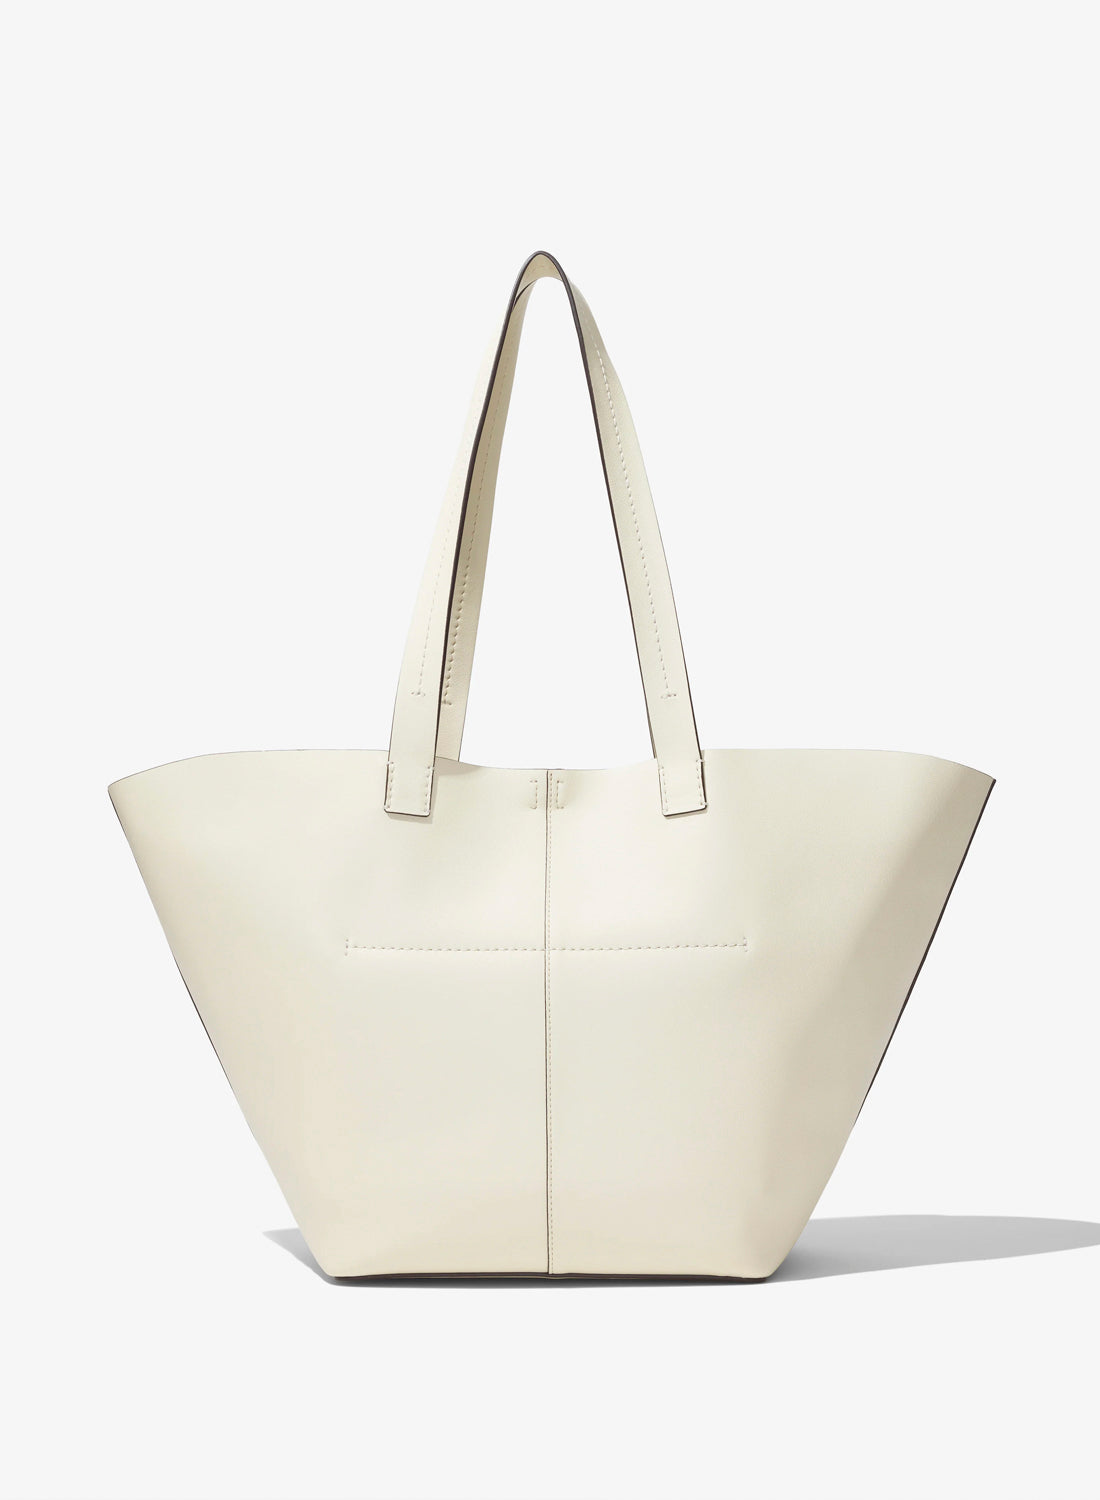 Proenza Schouler White Label Large Bedford Tote in Leather Off White